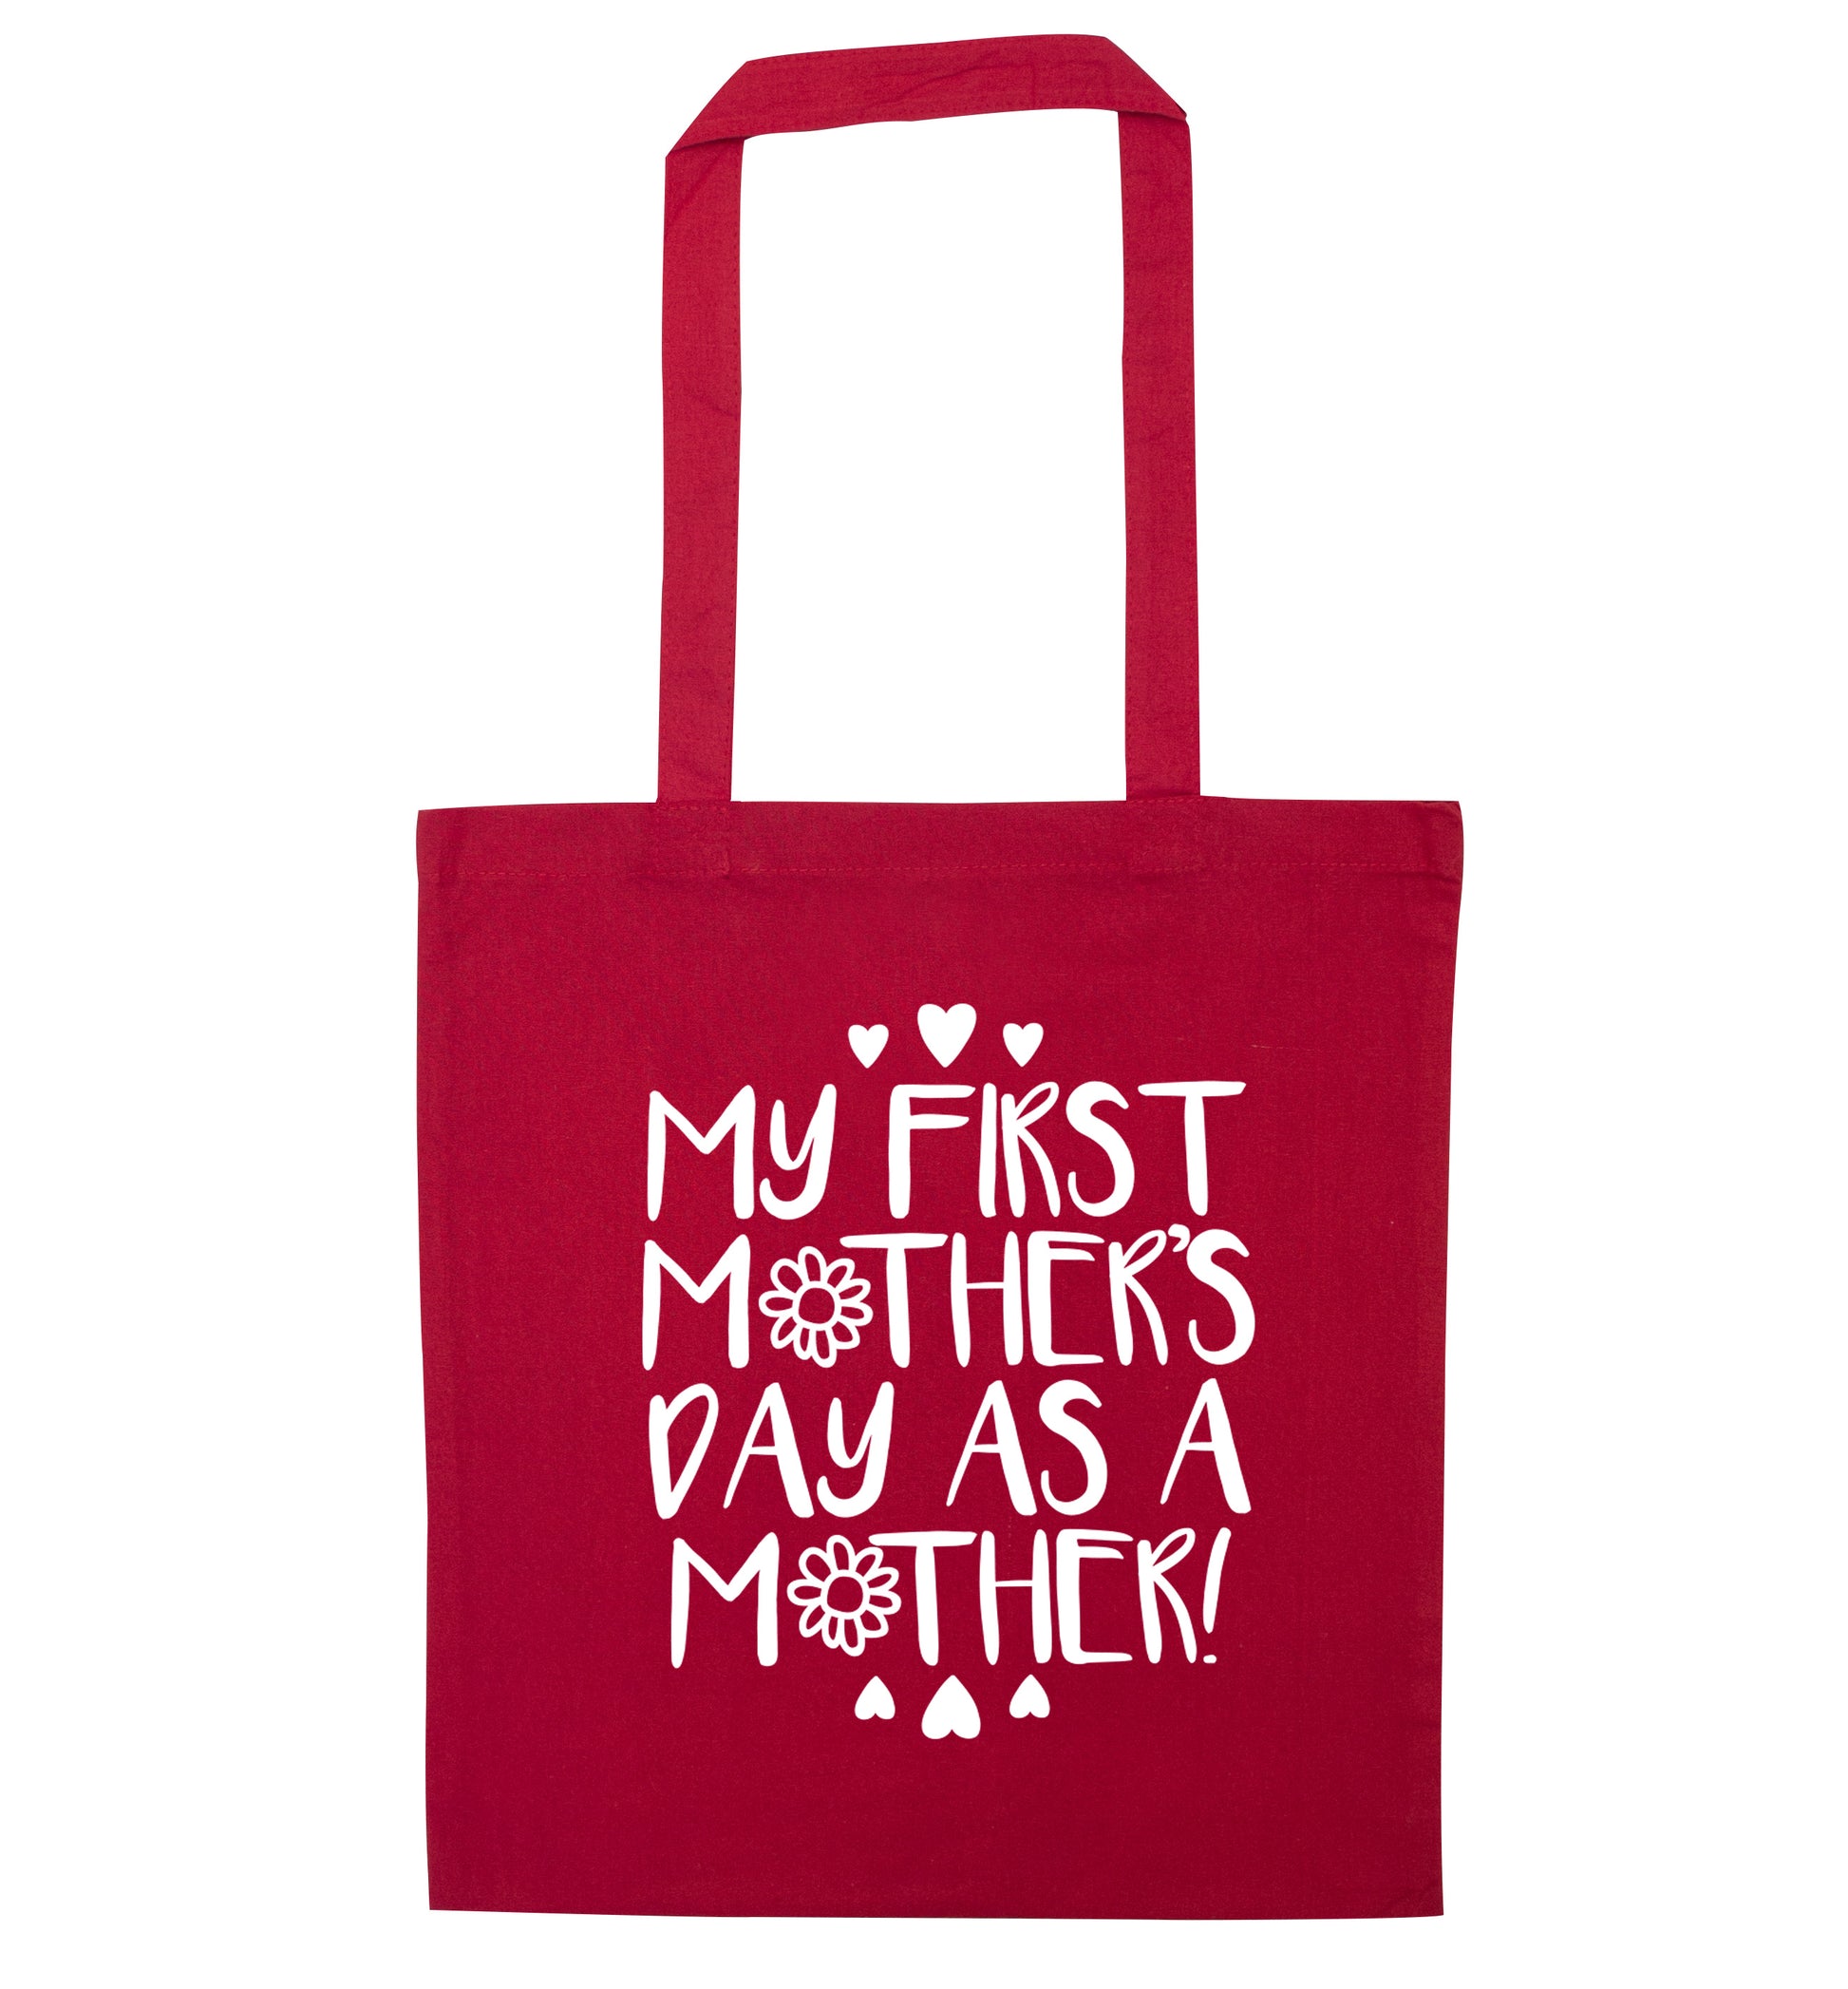 My first mother's day as a mother red tote bag